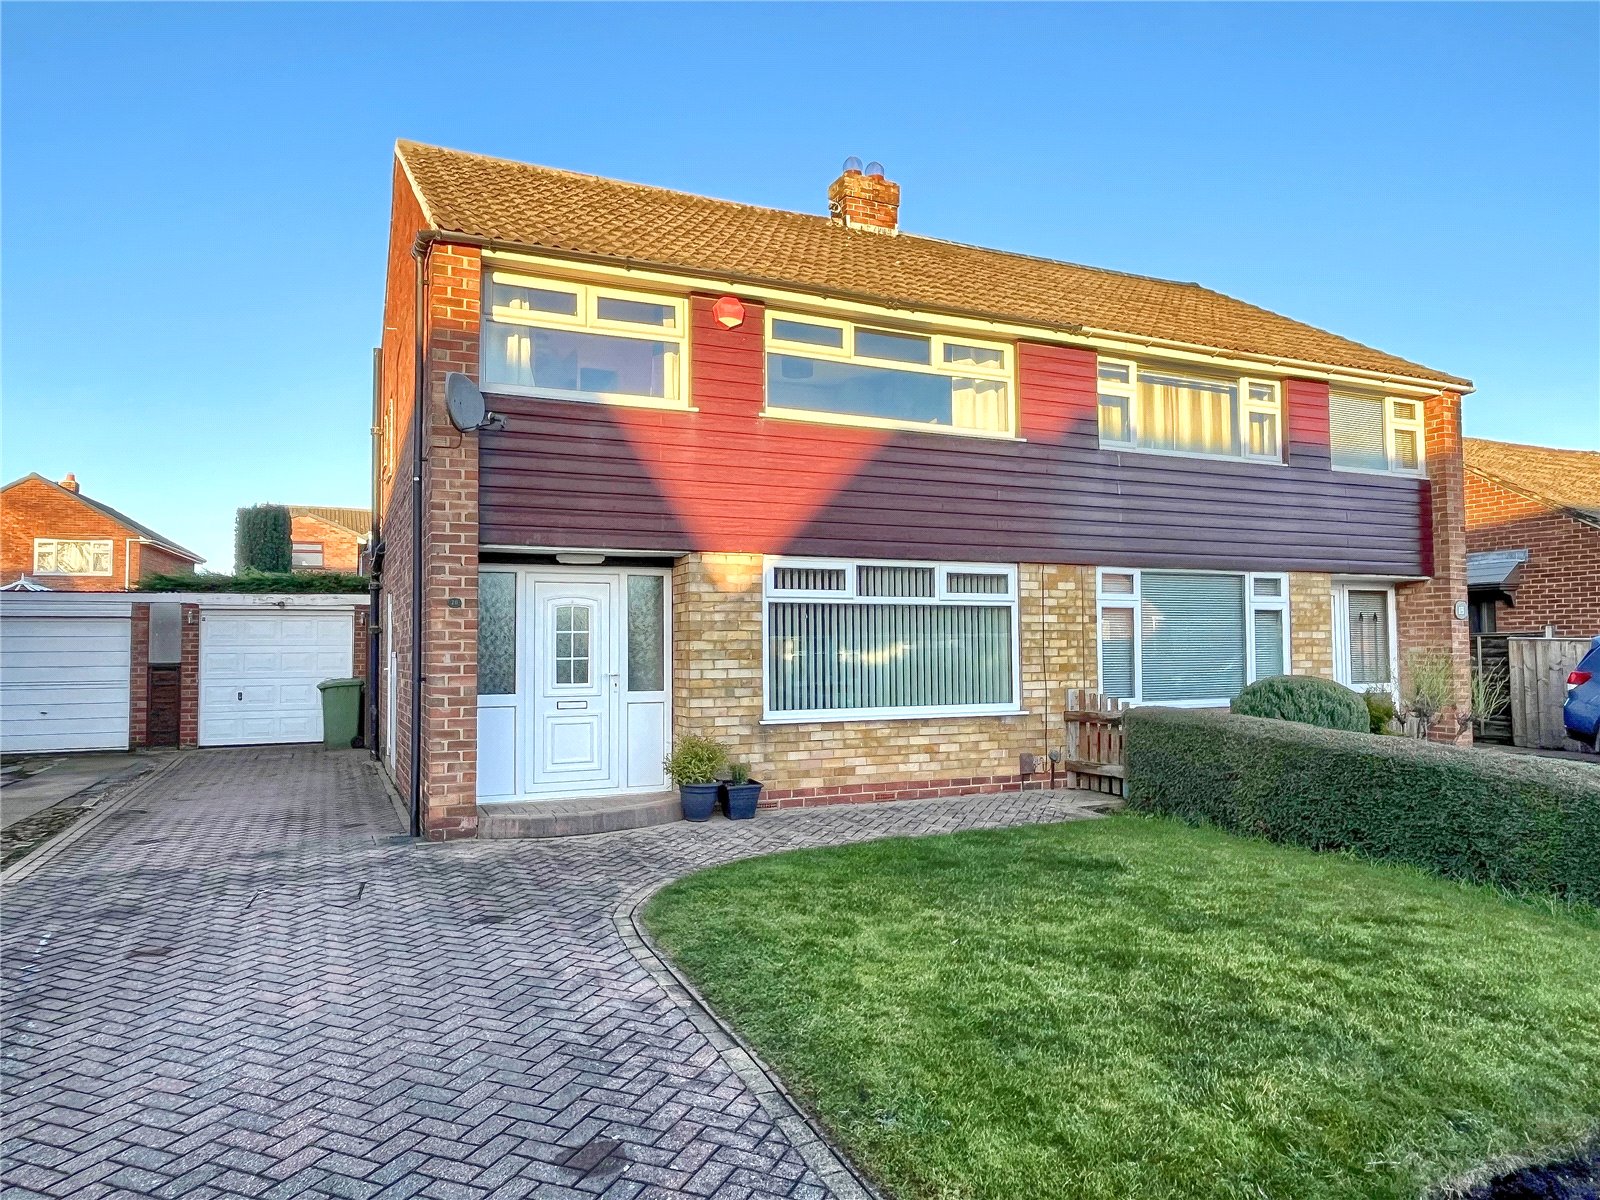 3 bed house for sale in Lingfield Drive, Eaglescliffe - Property Image 1